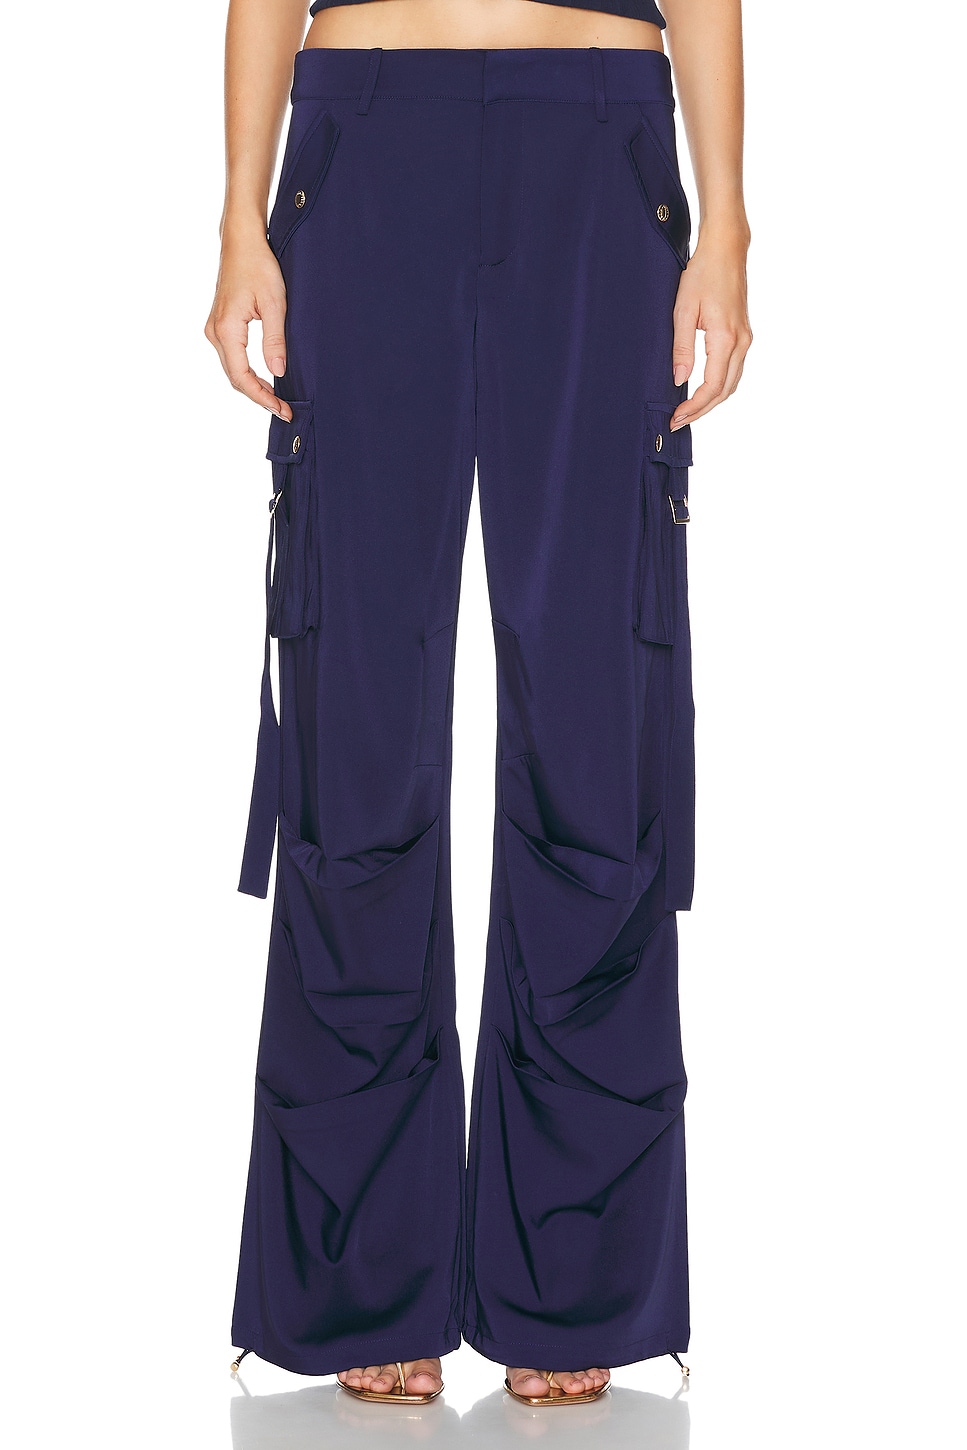 Lai Cargo Pant in Navy